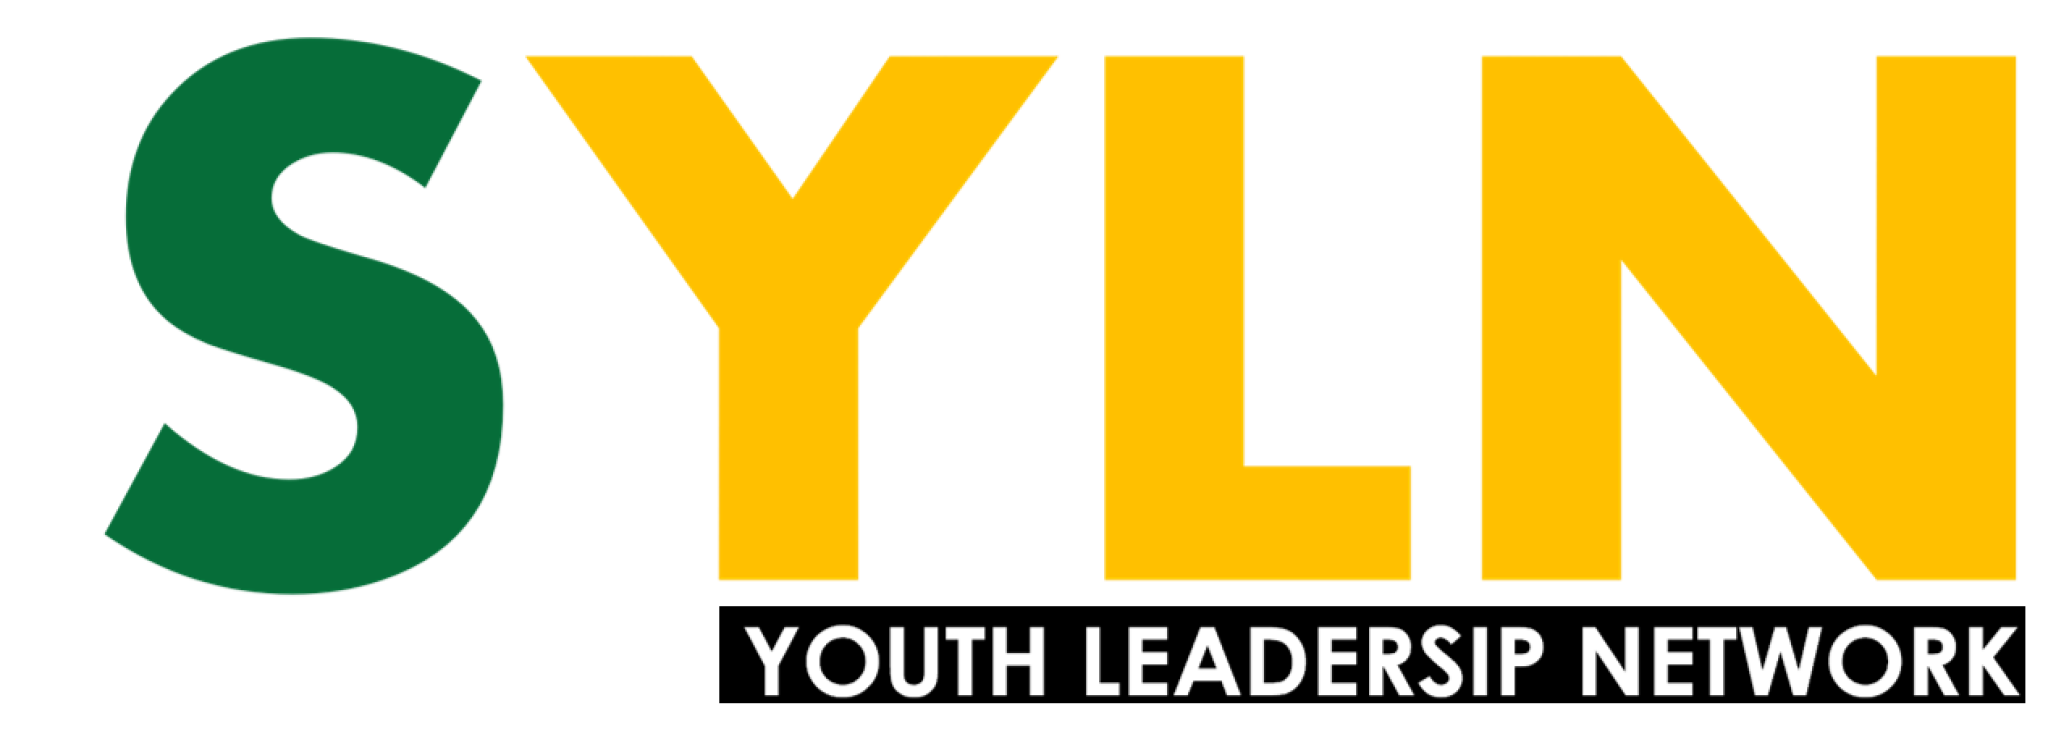 ssap youth logo png.png